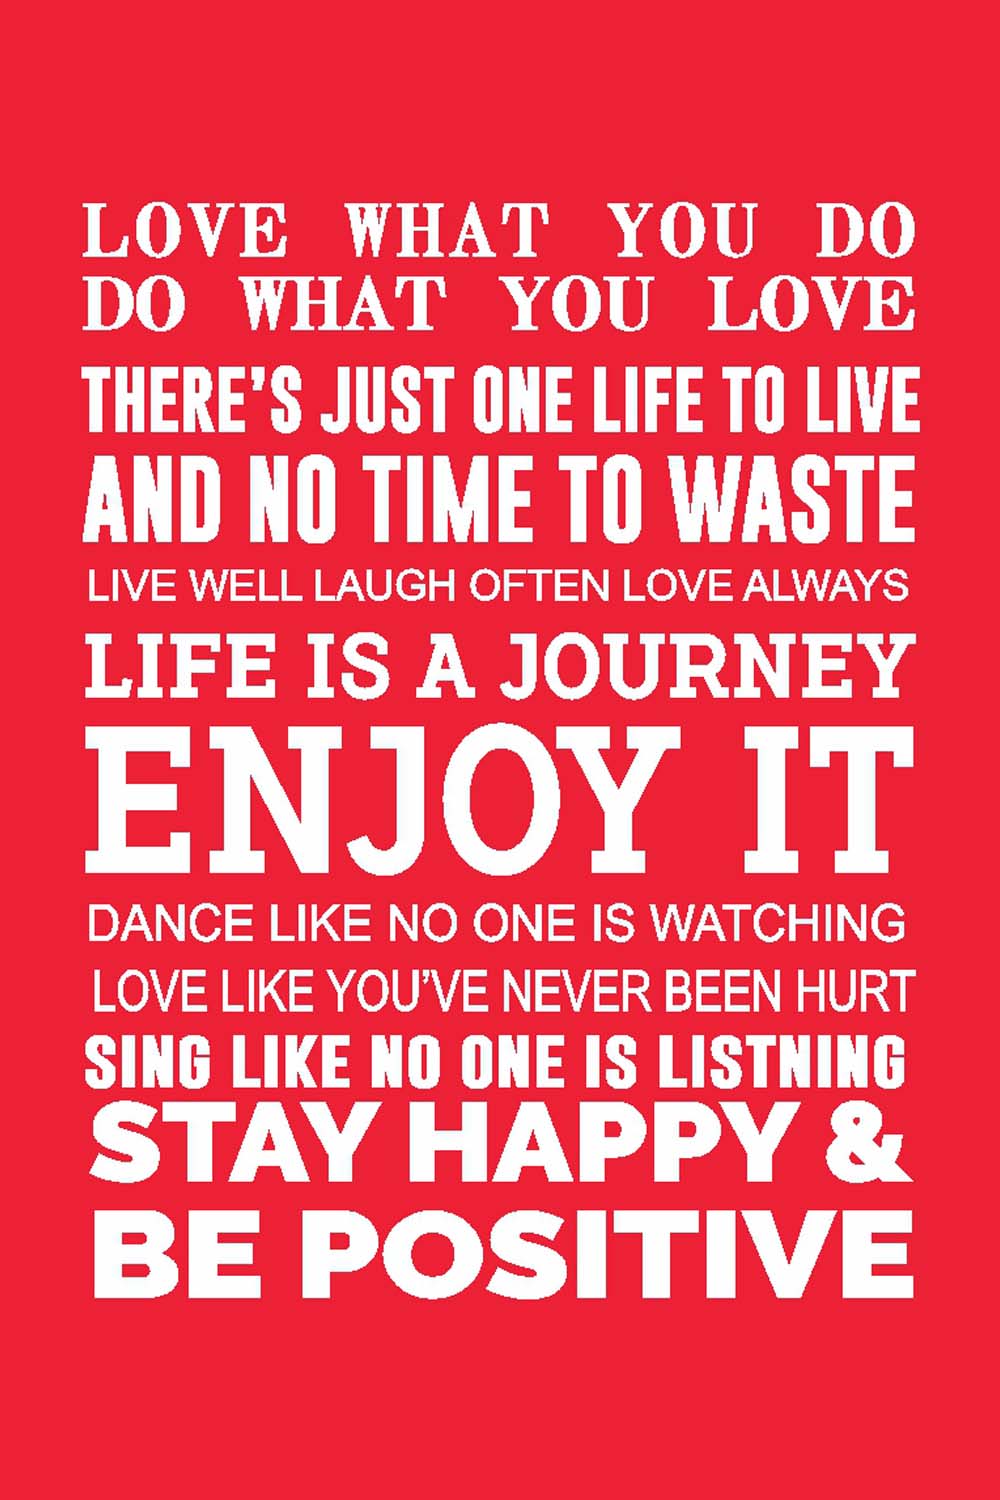 Stay Happy & Be Positive - Glass Framed Poster